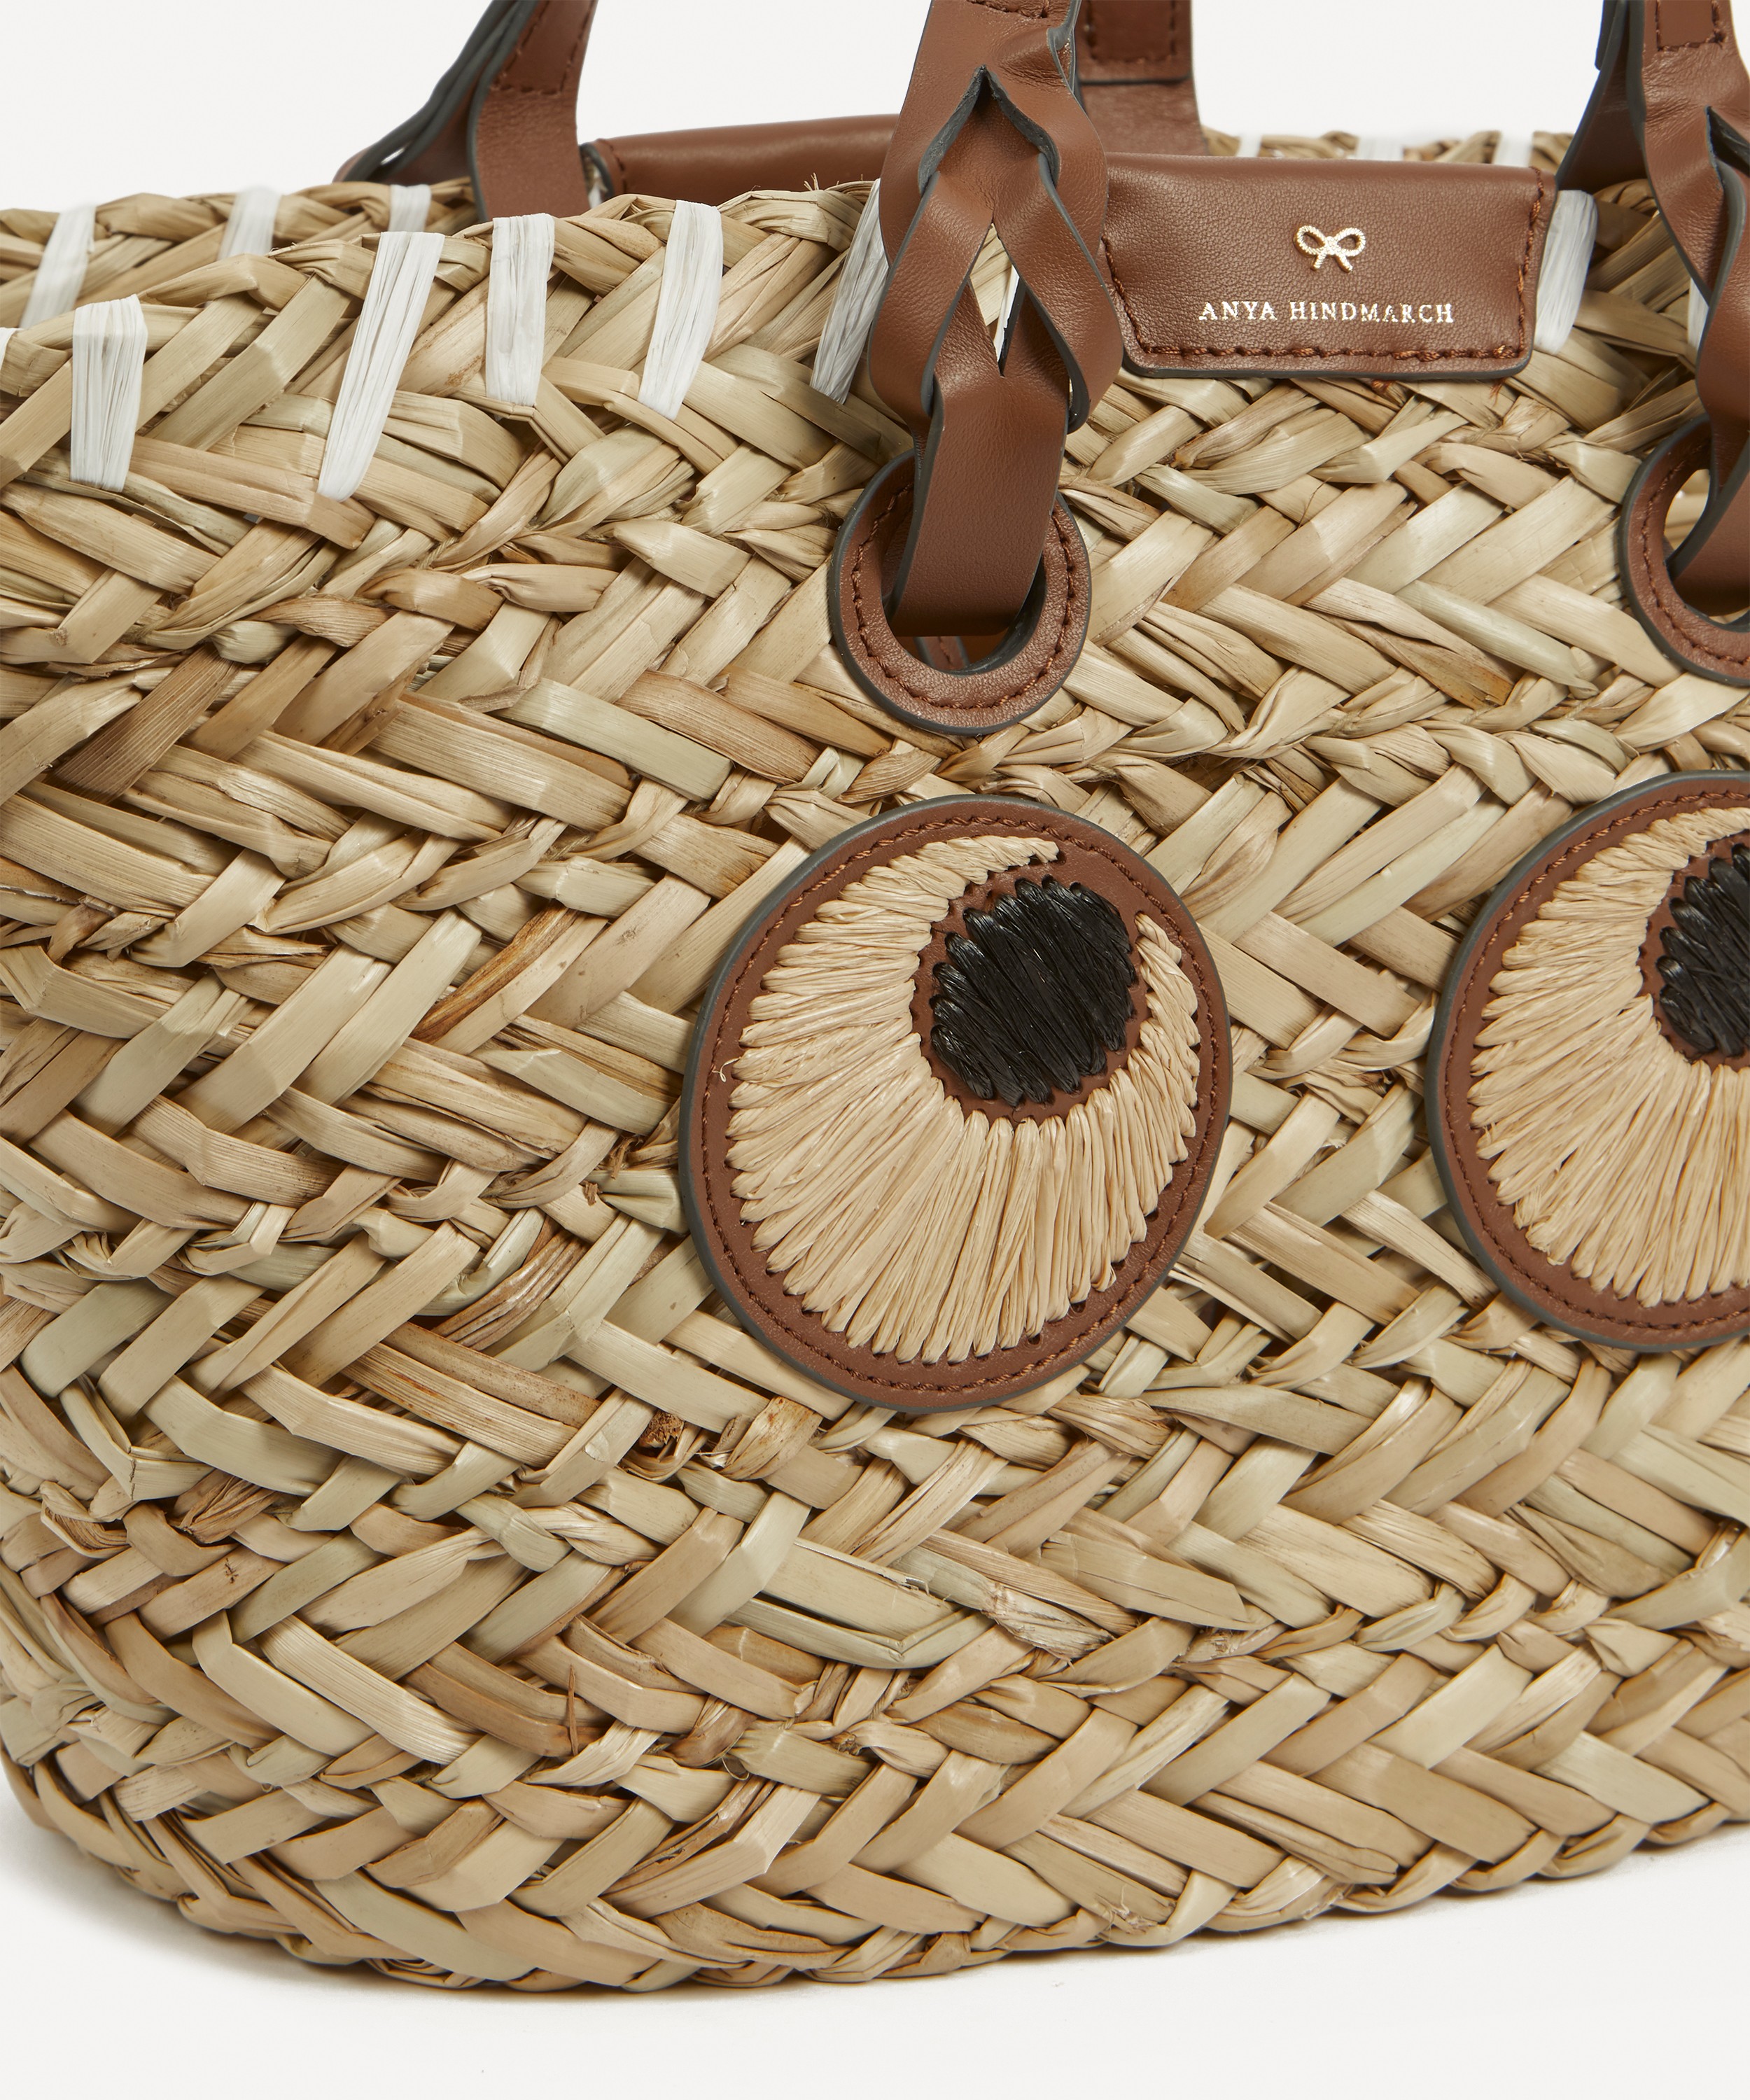 Anya Hindmarch - Small Paper Eyes Woven Seagrass Basket Bag image number 4